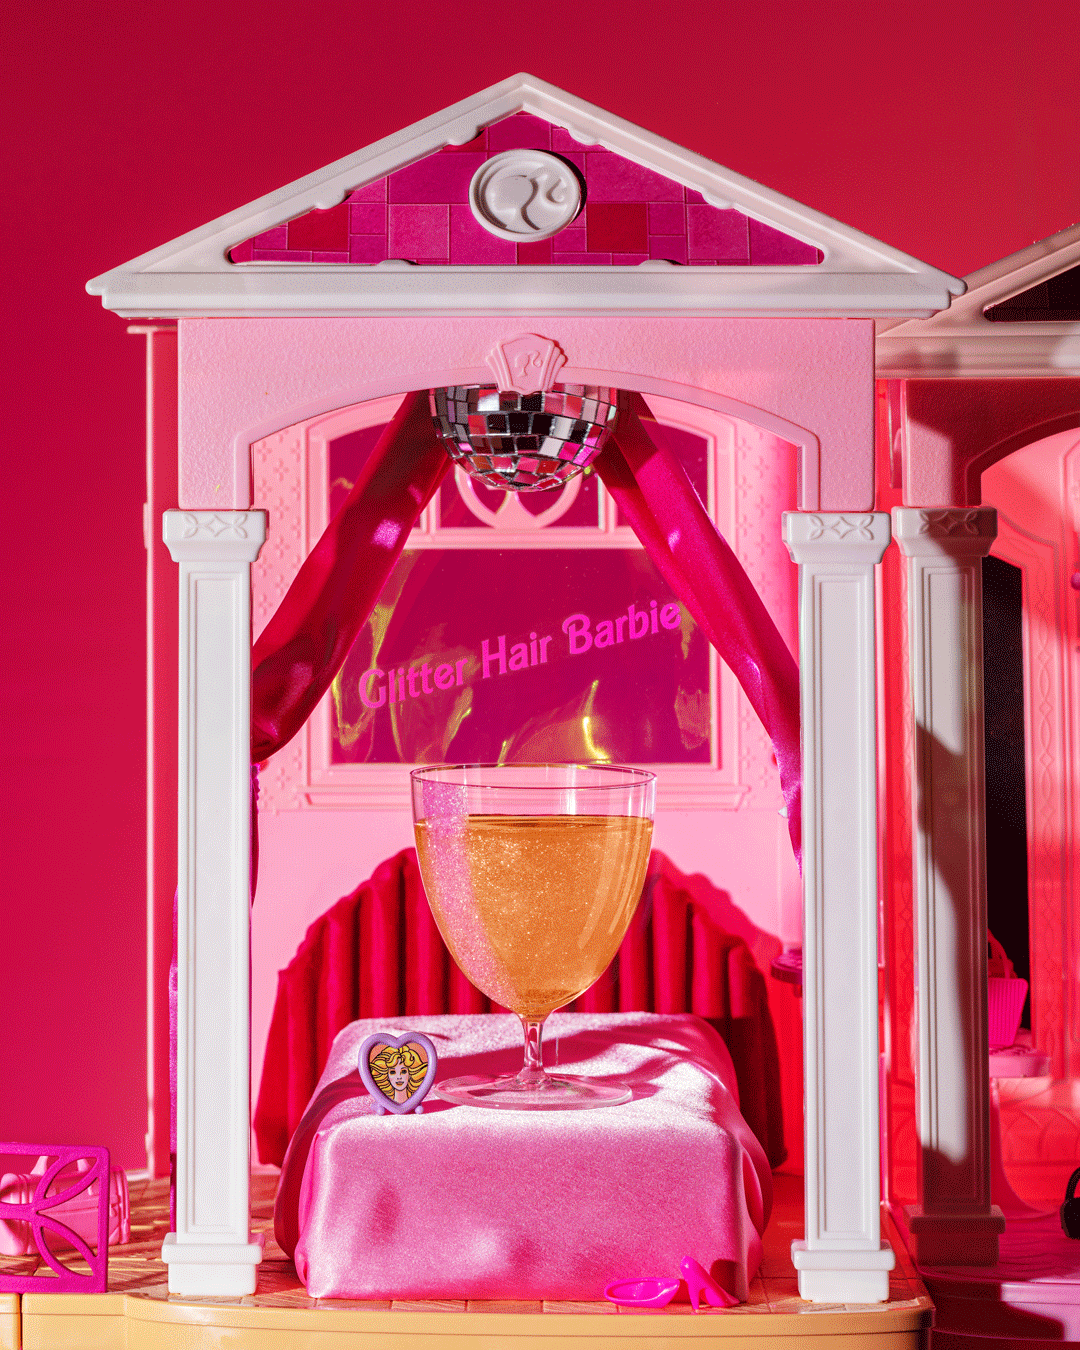 We Turned An Old Barbie Dreamhouse Into A Bar With Themed Barbie Cocktails In Each Room (9 Pics)